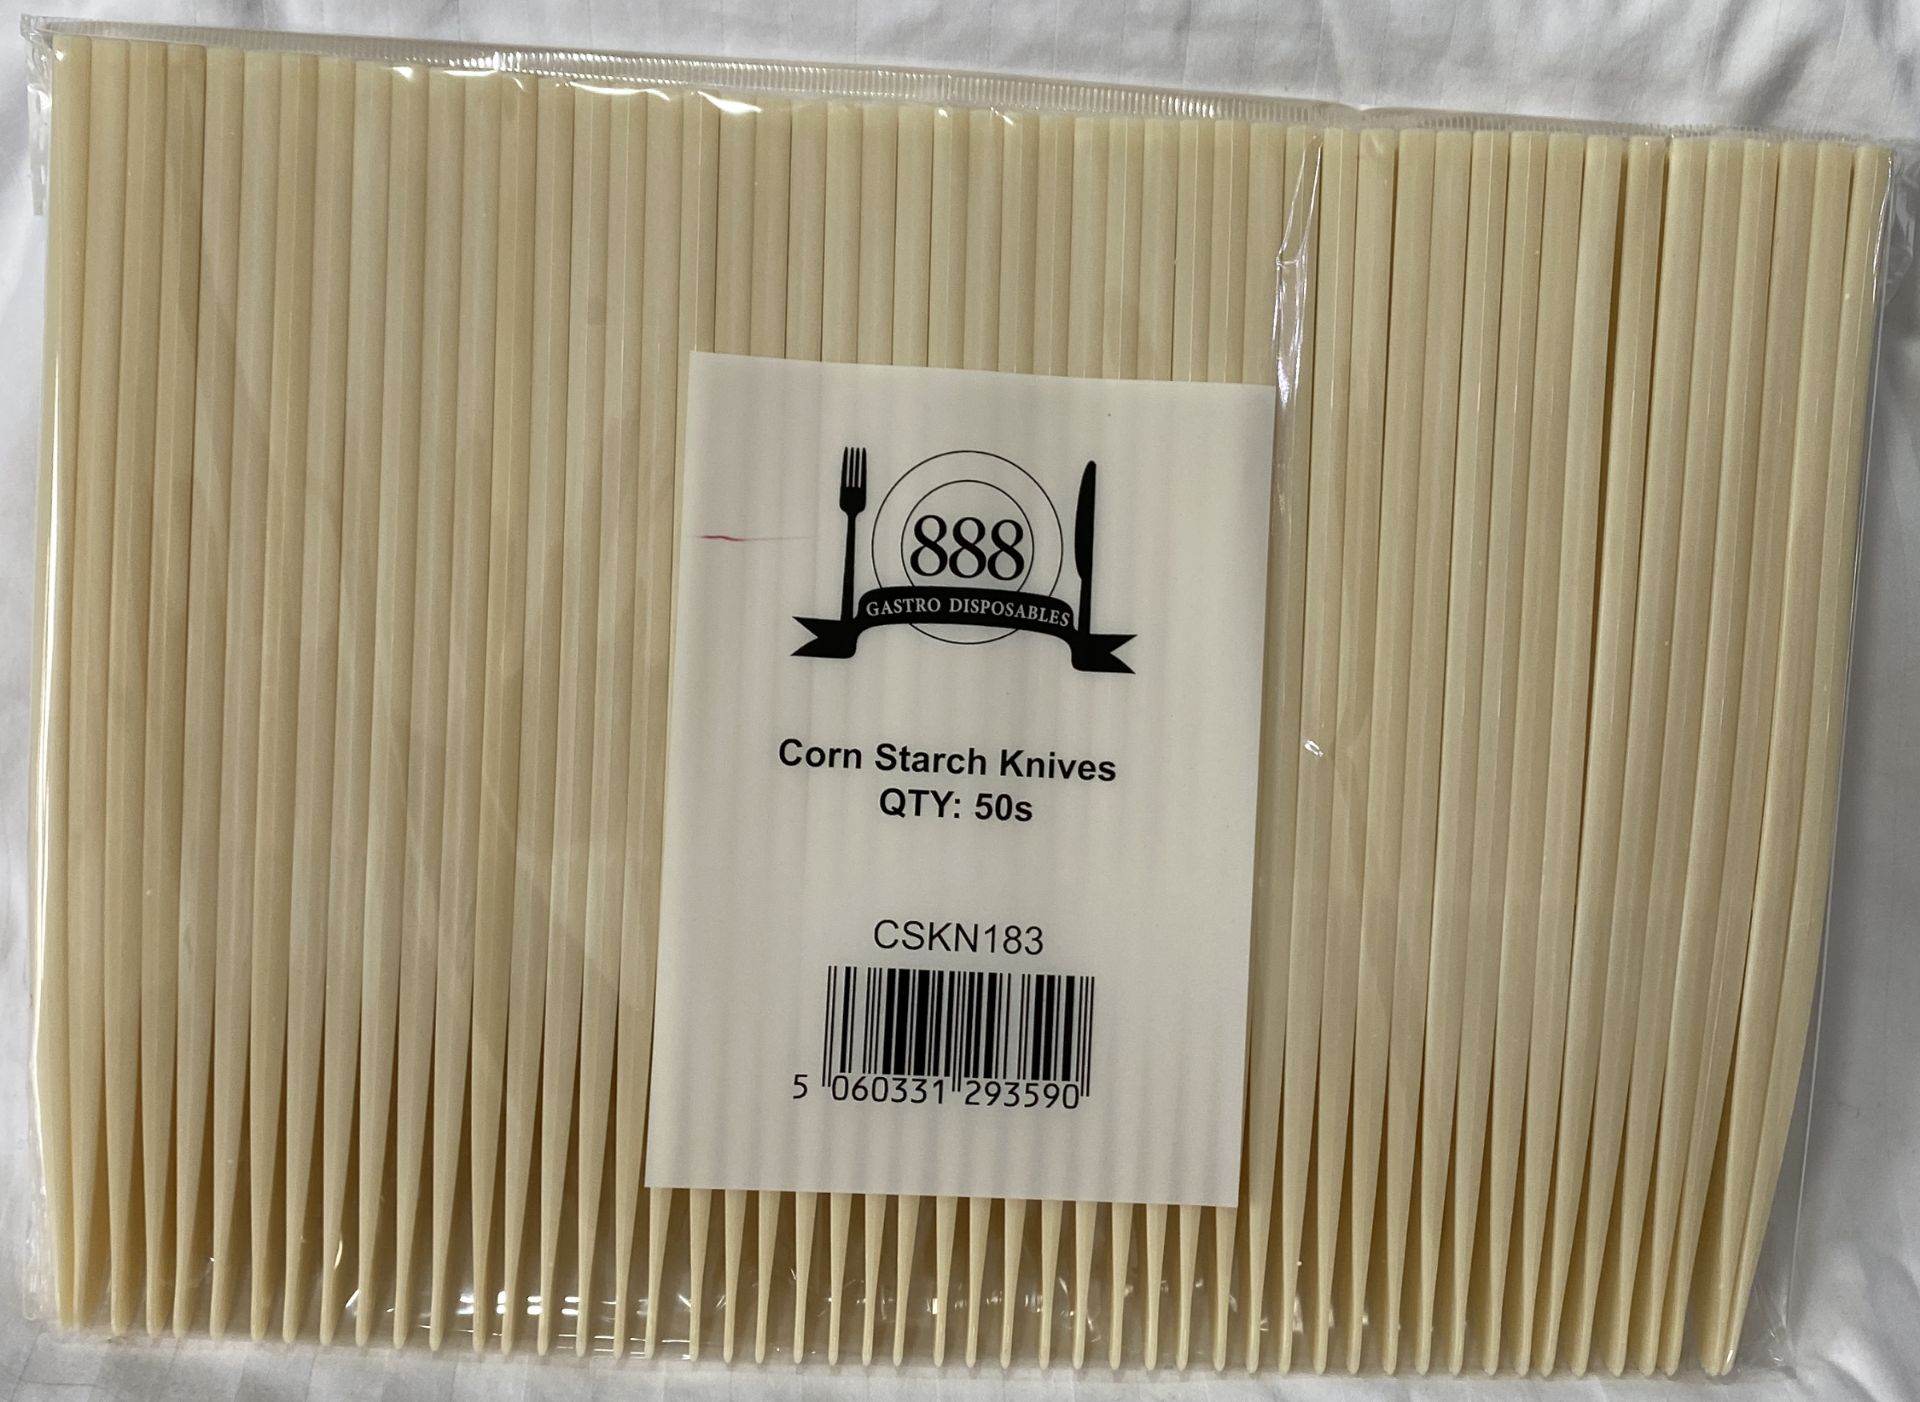 10 x Boxes of 1000 Corn Starch Knives by 888 Gastro Disposables - Image 2 of 3